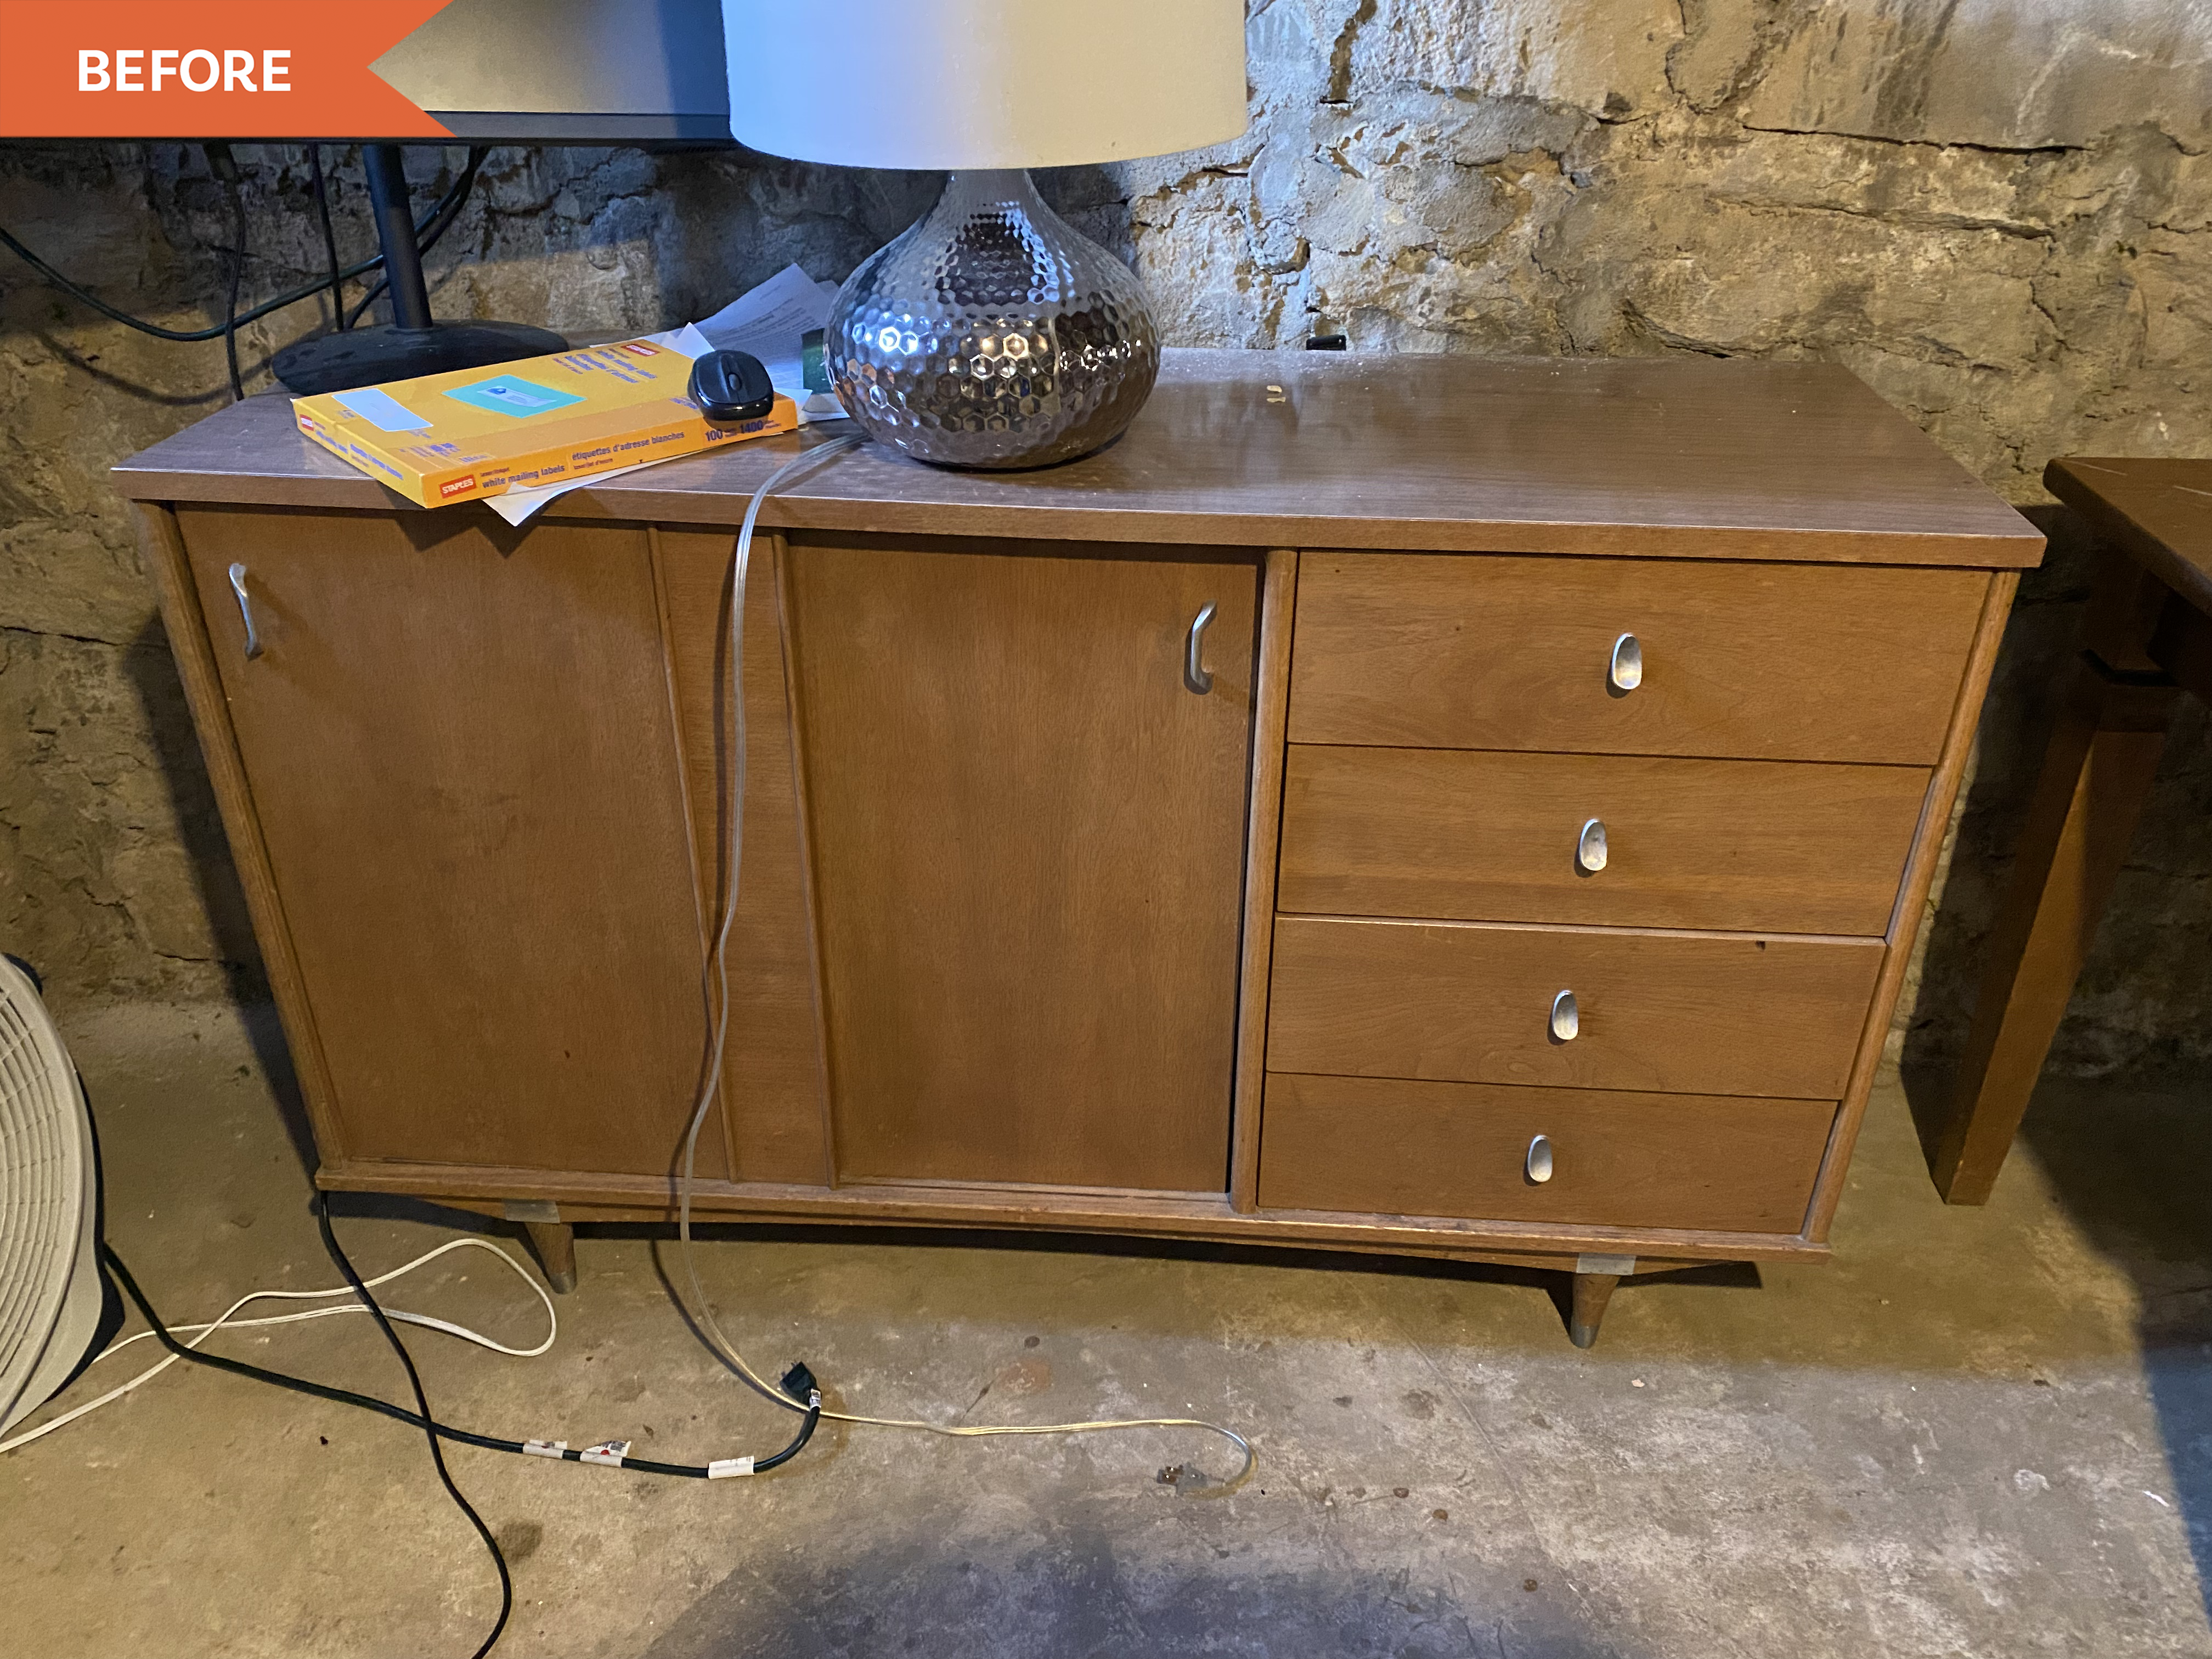 Mid-Century Dresser Redo - Before and After Photos